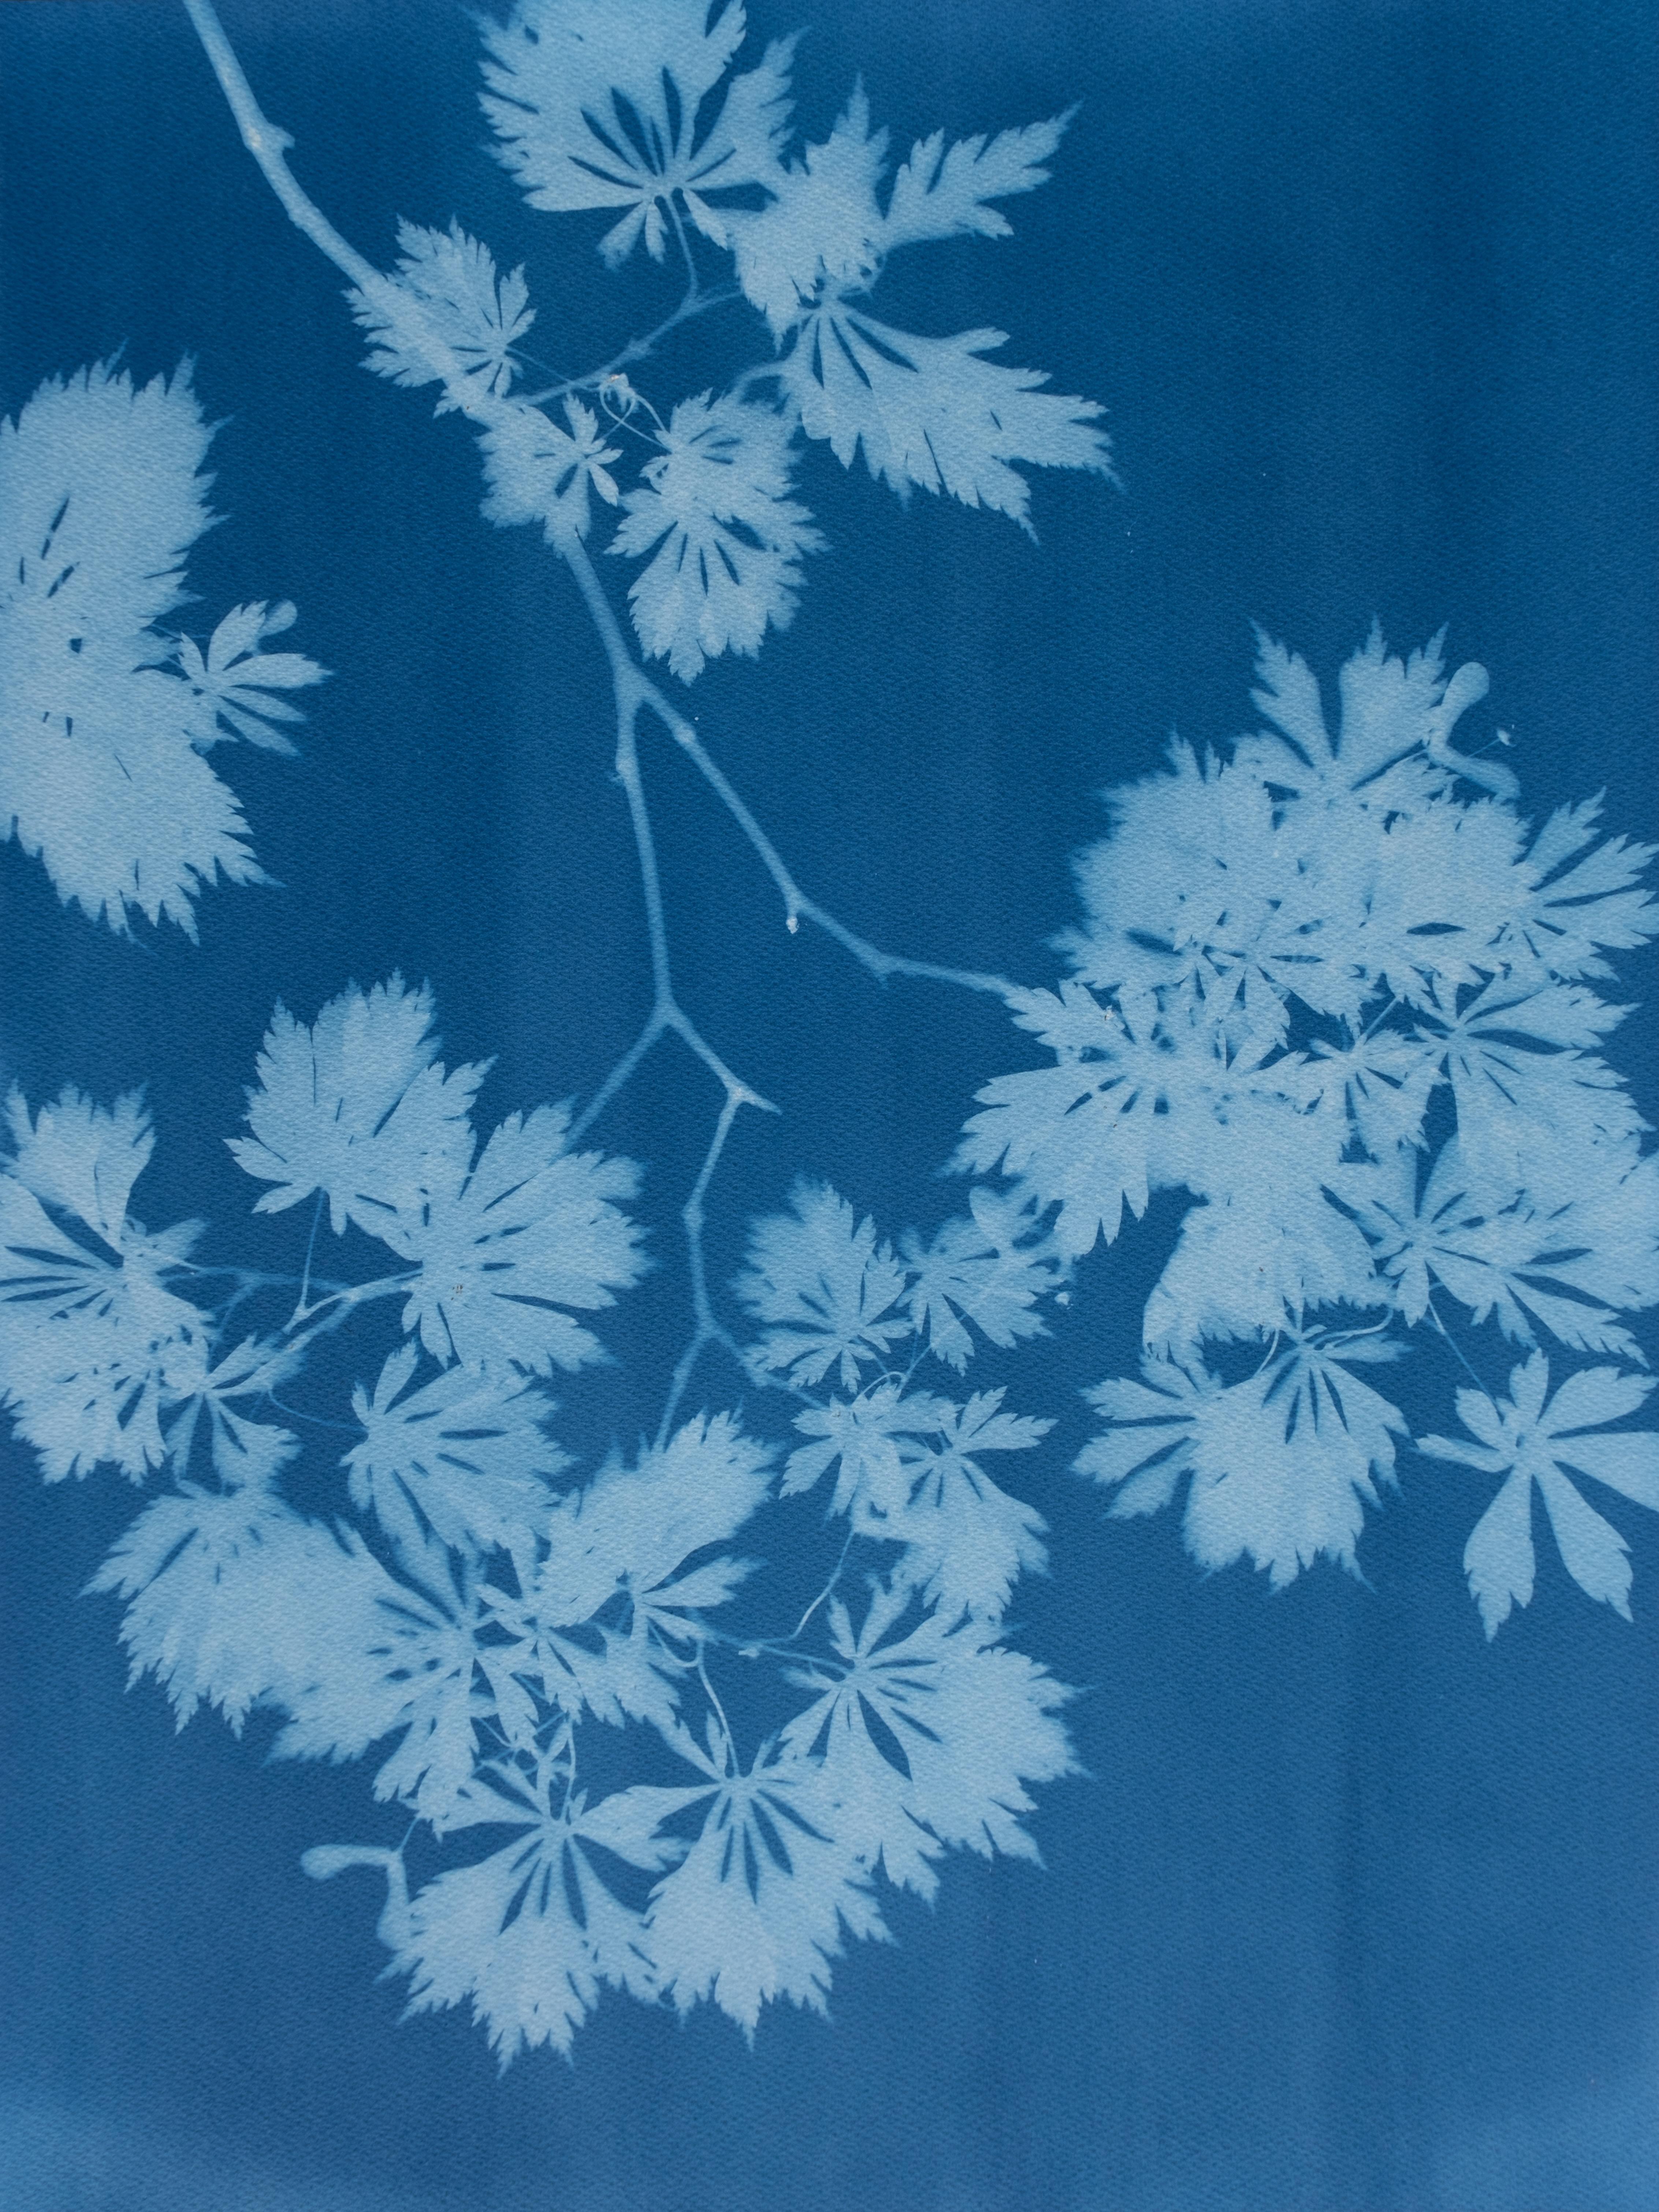 Indigo Maple Triptych (3 hand-printed botanical cyanotypes, 24 x 18 in. each) - Photograph by Christine So